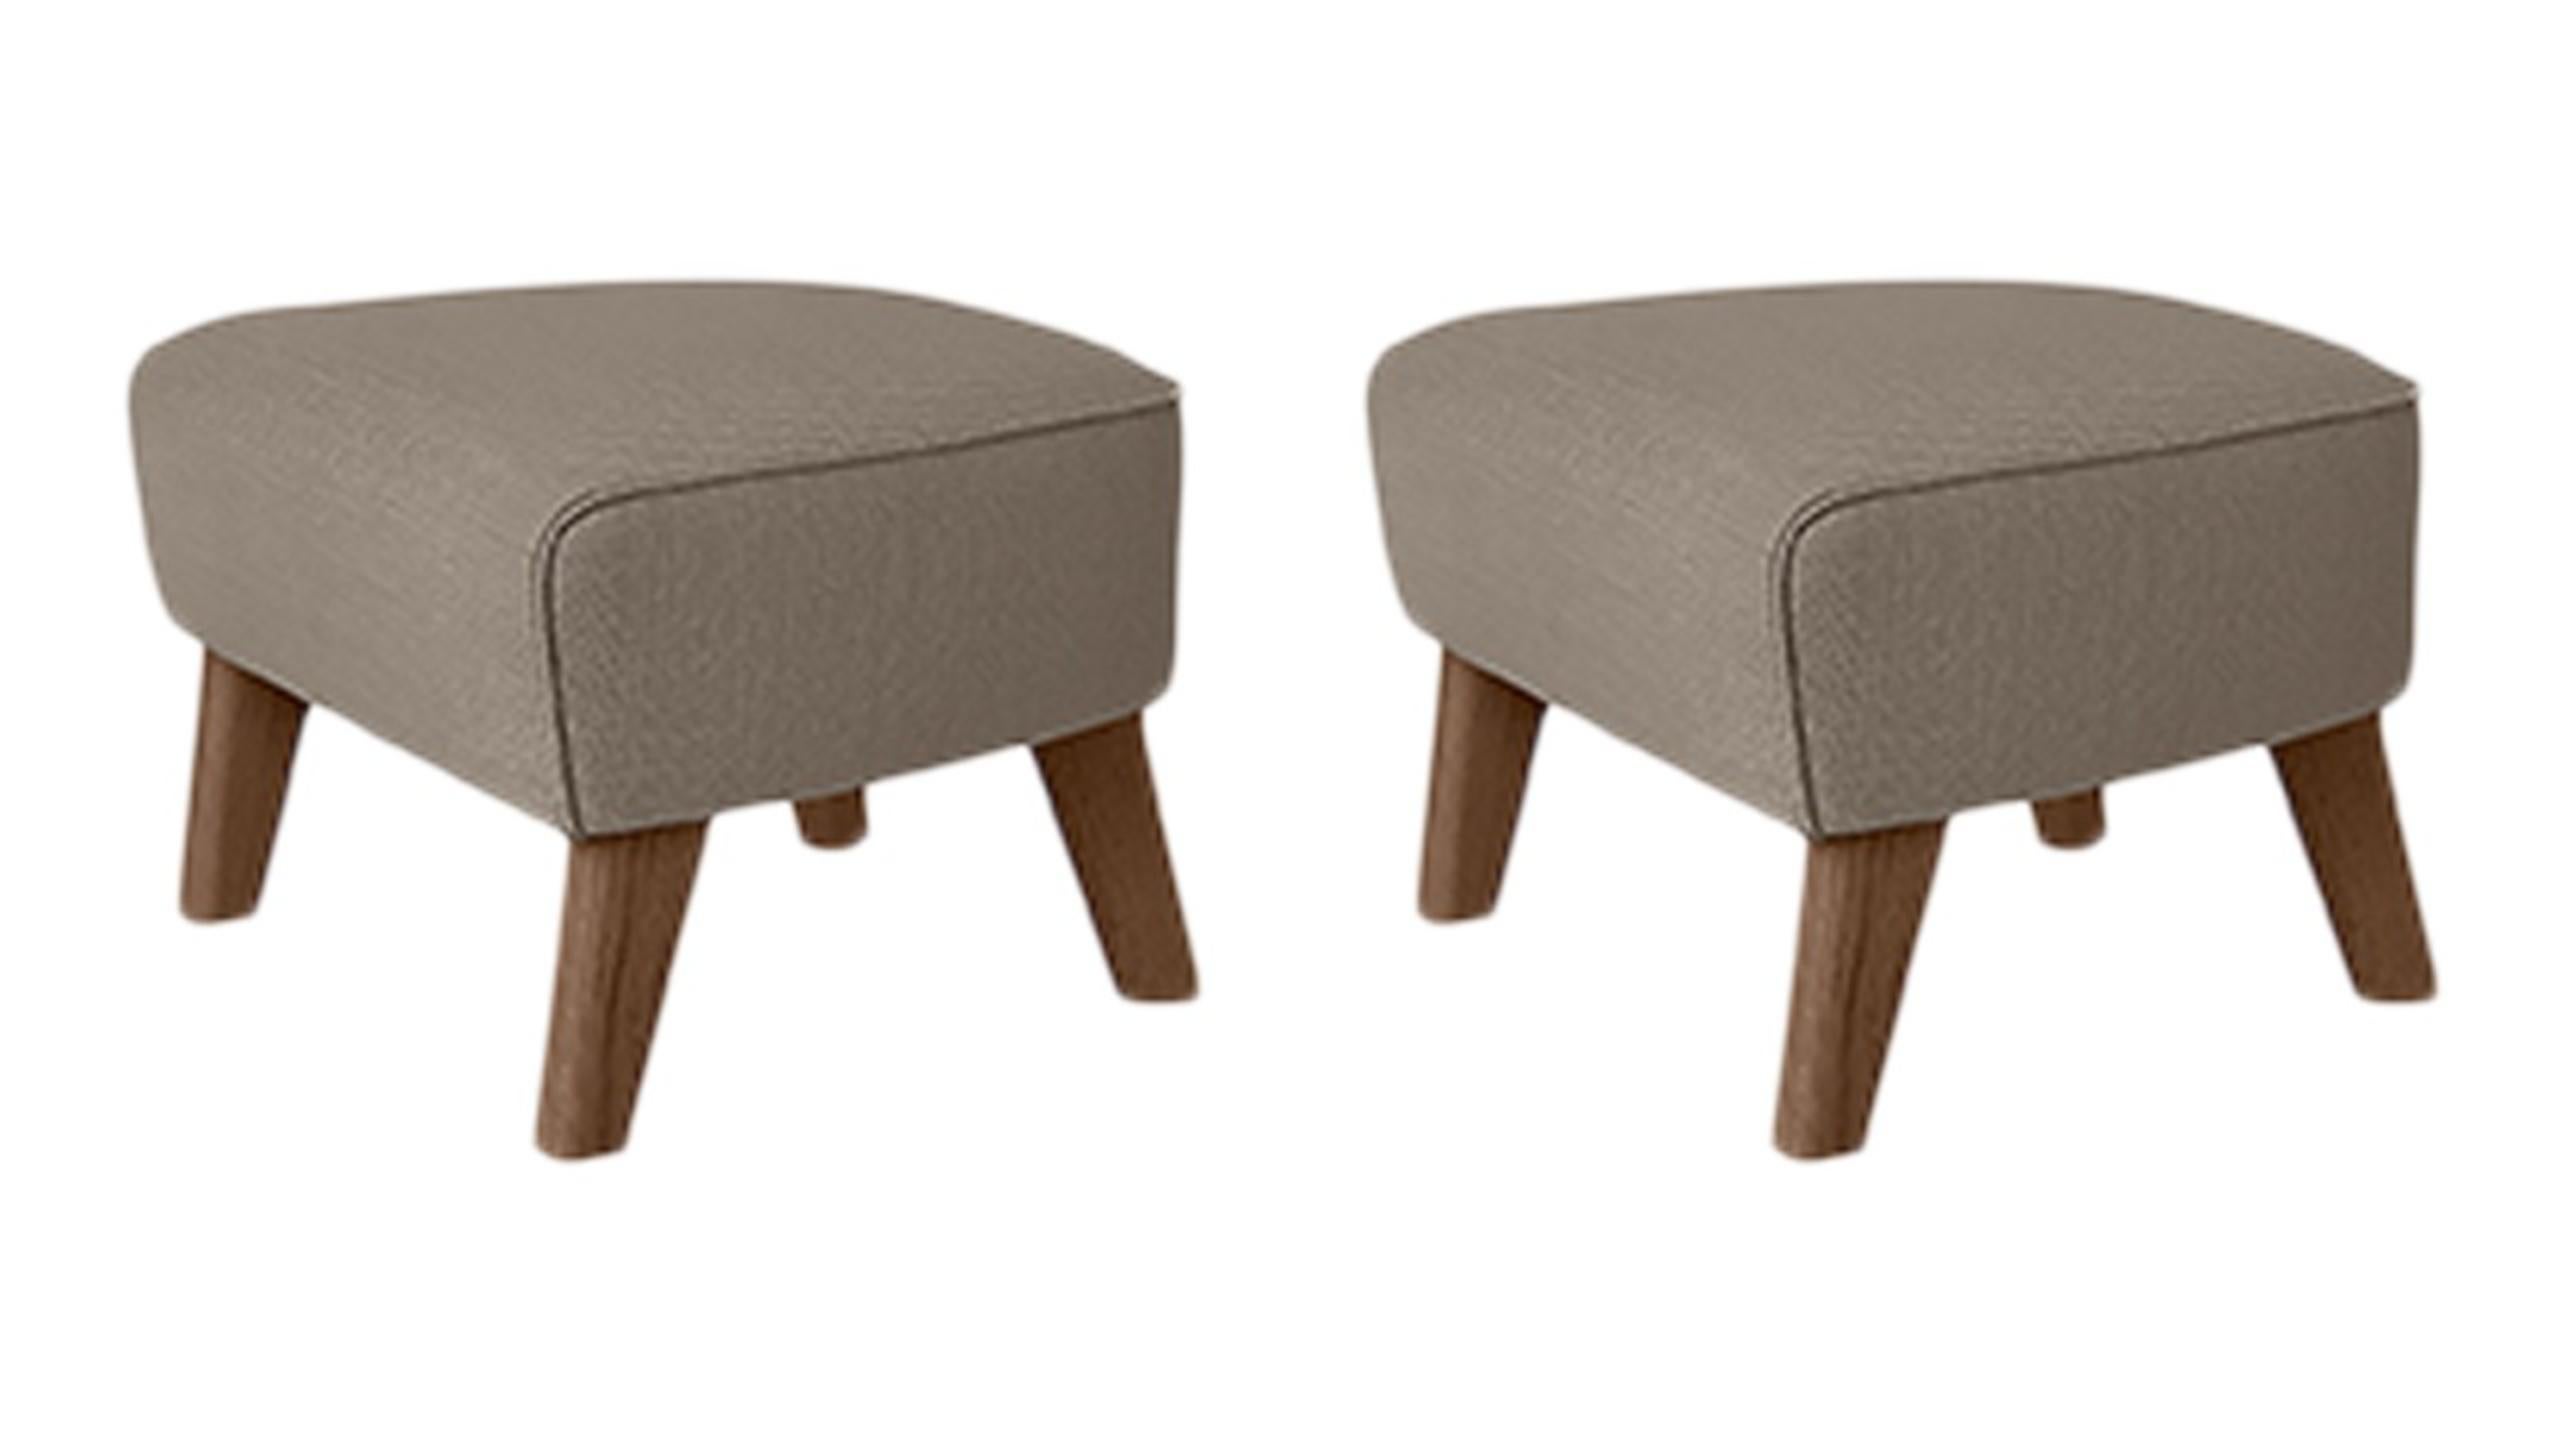 Set of 2 dark beige, smoked oak Raf Simons Vidar 3 my own chair footstool by Lassen
Dimensions: W 56 x D 58 x H 40 cm 
Materials: Textile
Also Available: Other colors available.

The My Own Chair Footstool has been designed in the same spirit